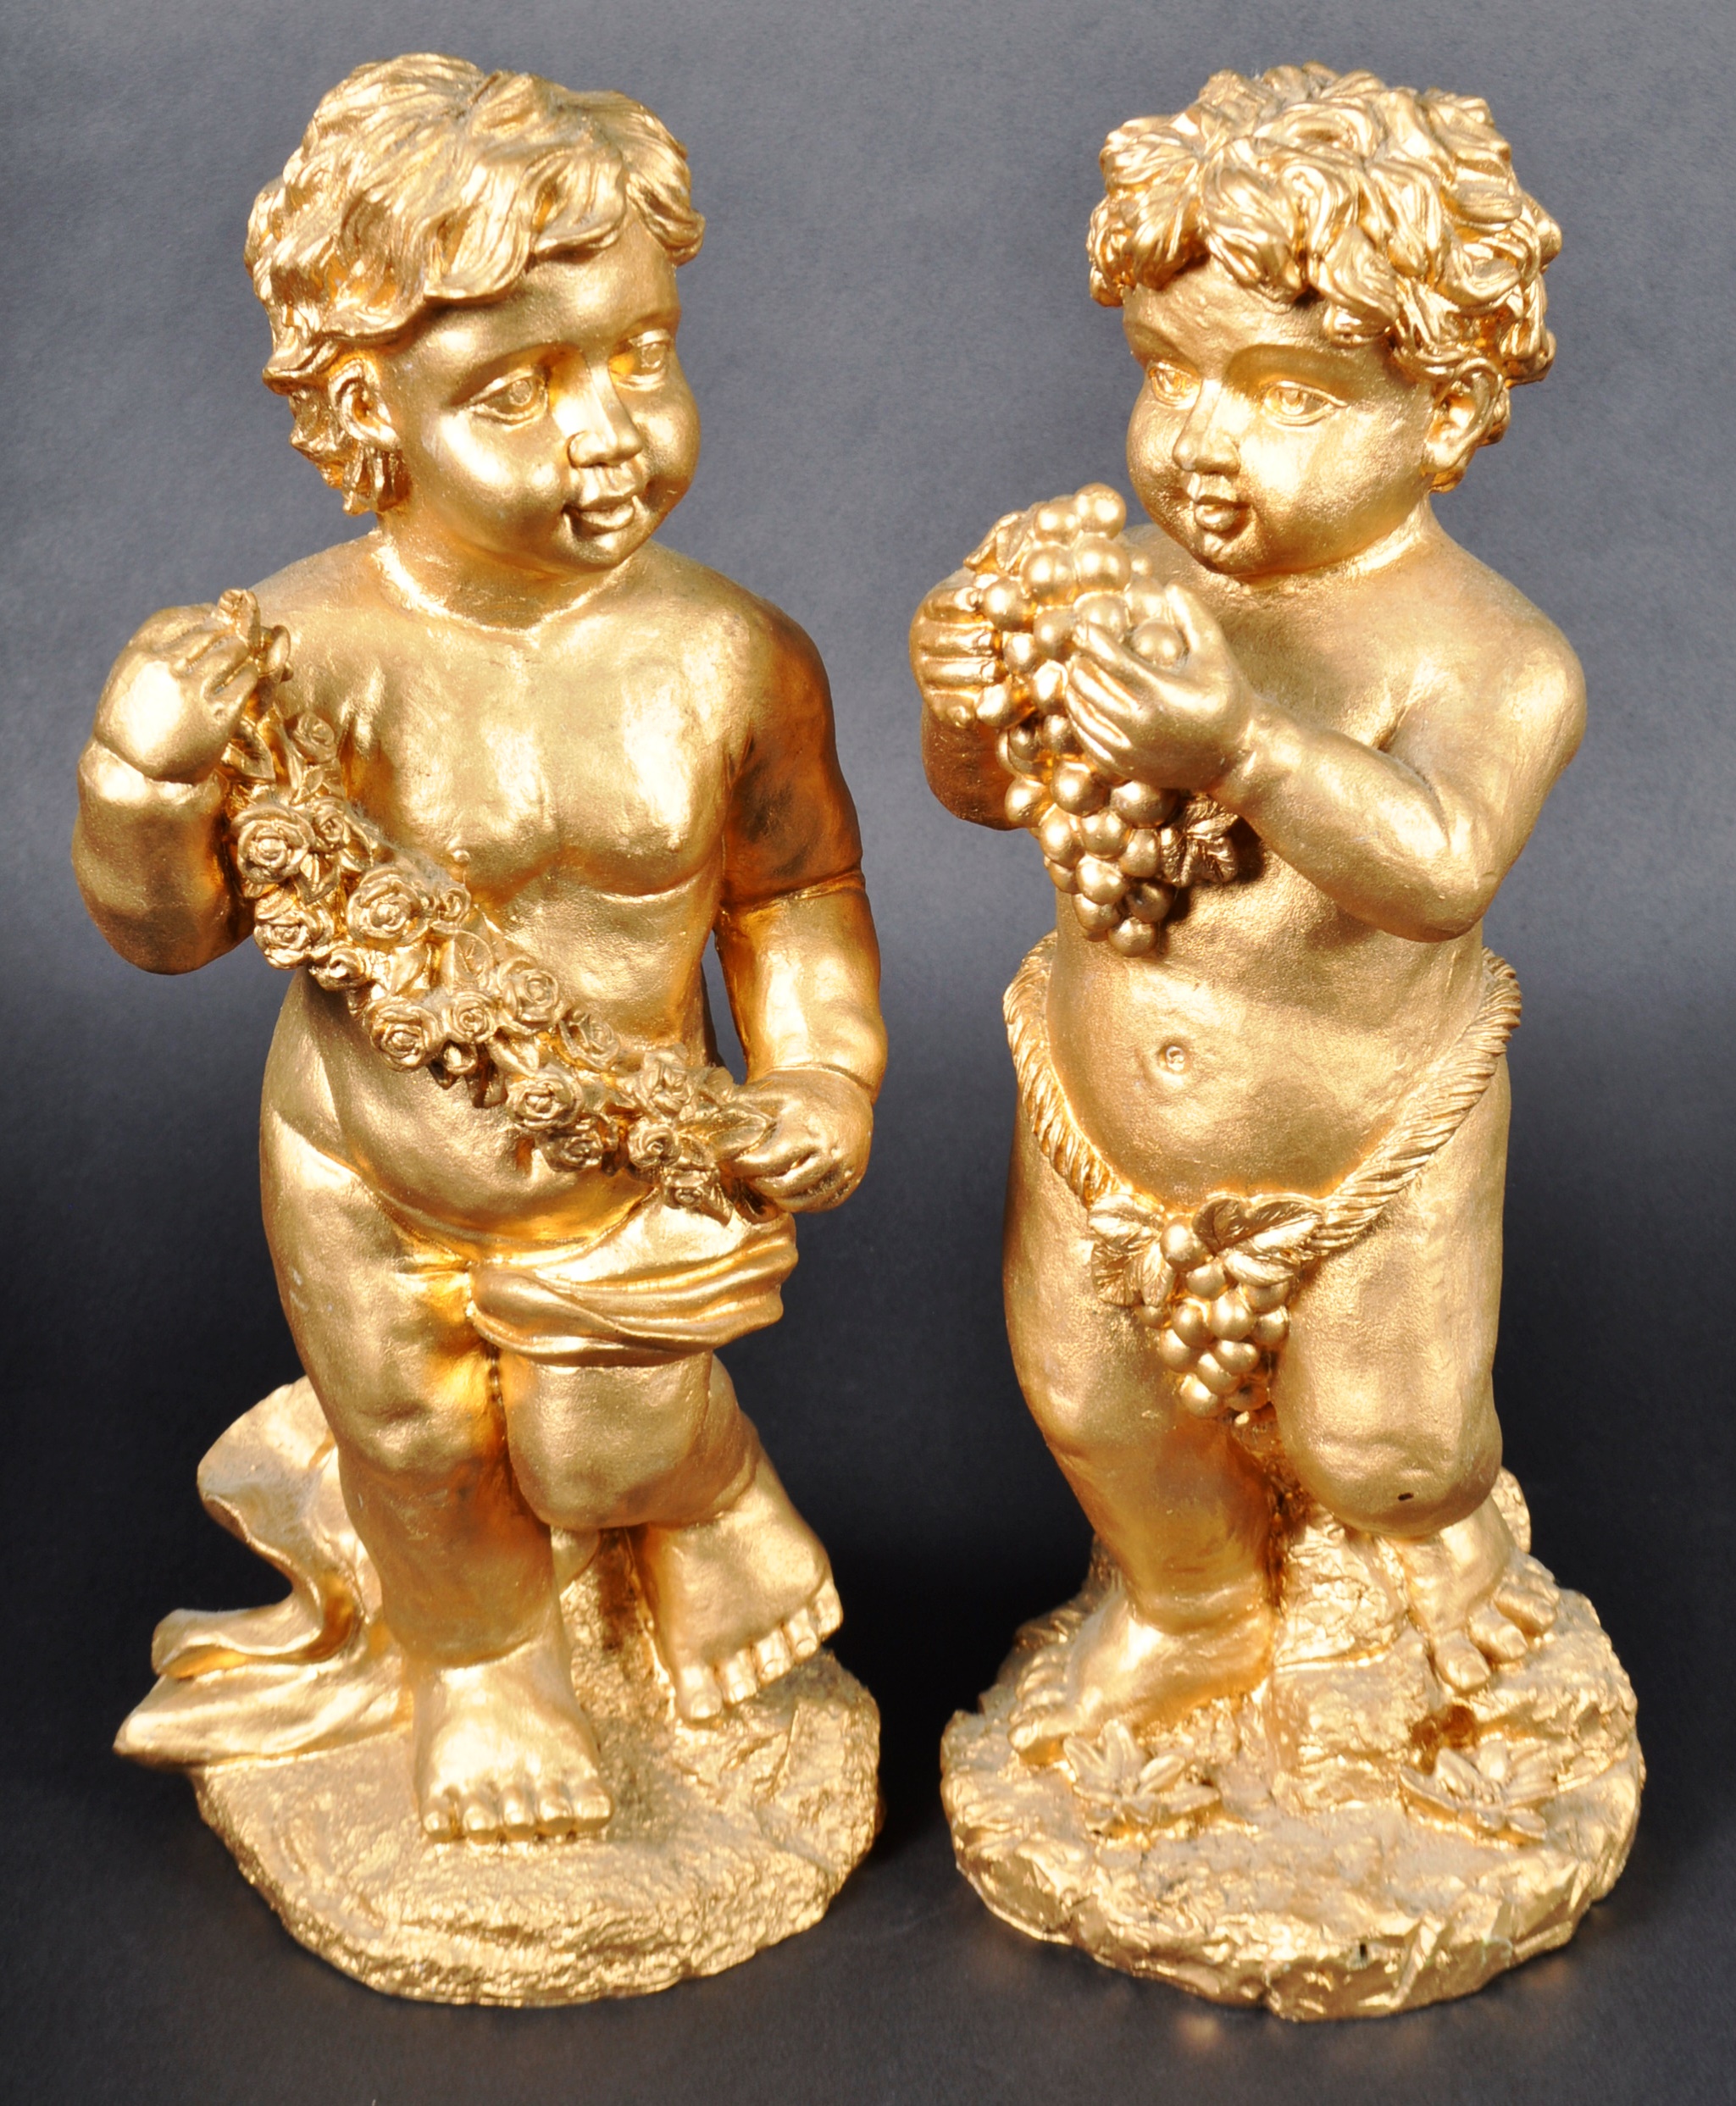 PAIR OF CONTEMPORARY GILT RESIN FIGURES MOULDED AS CHERUBS - Image 2 of 10